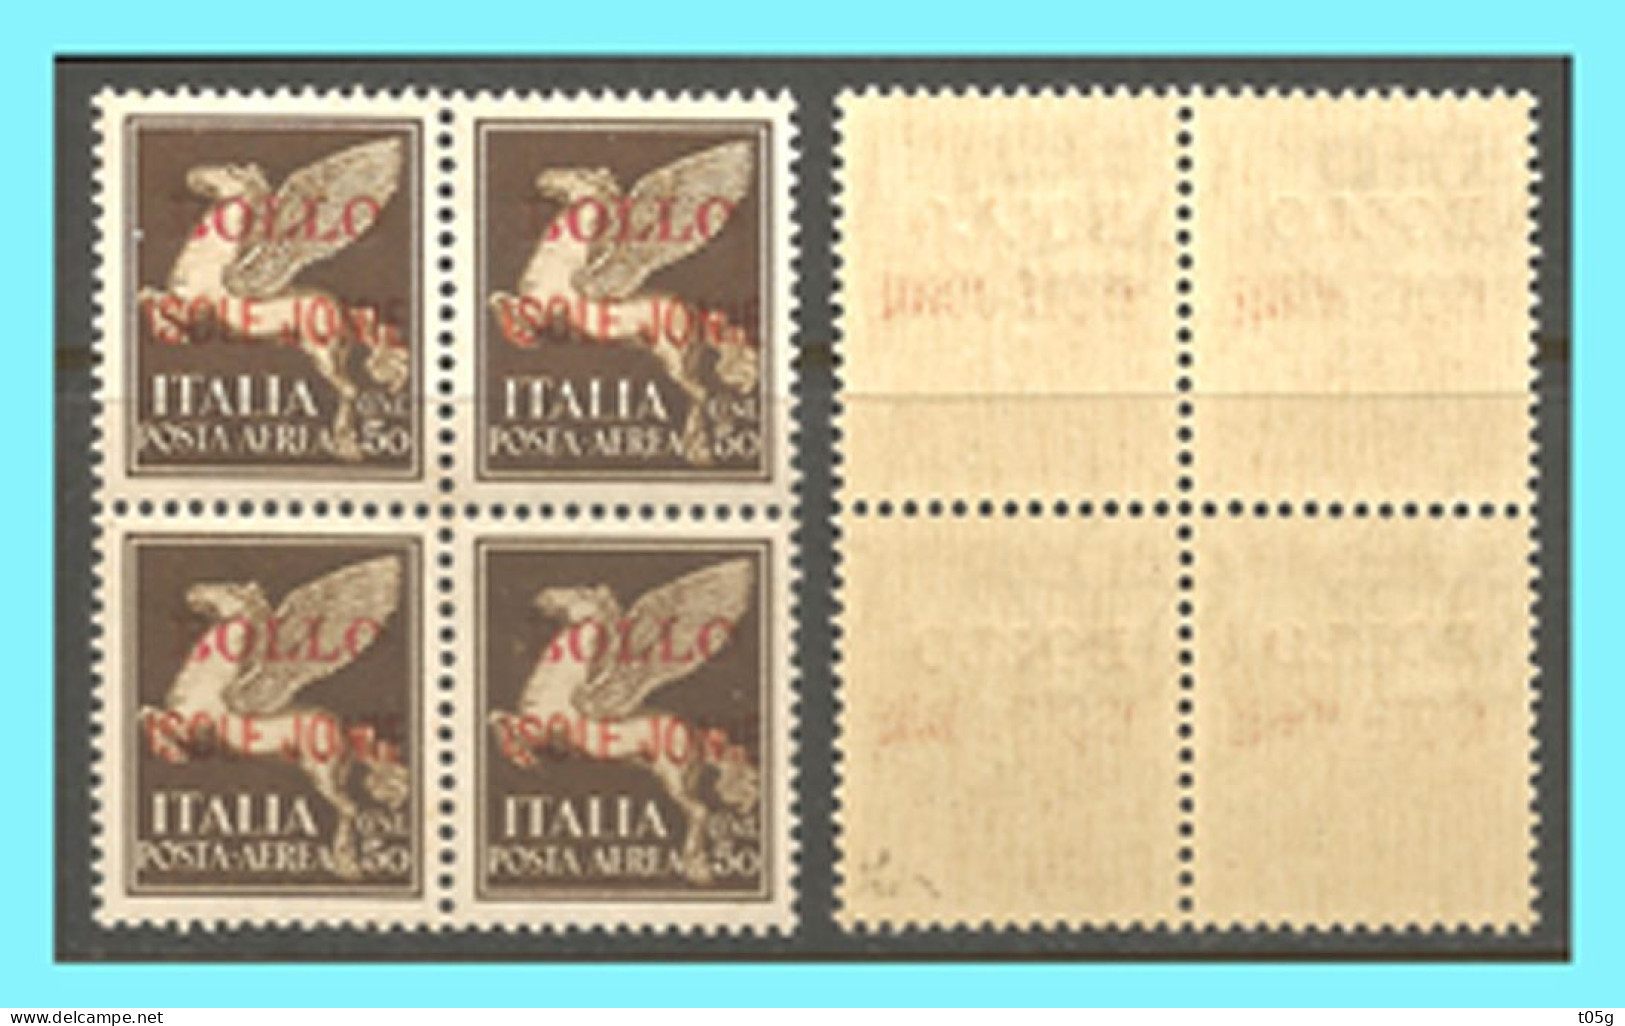 REVENUE: ITALY- GREECE- GRECE- HELLAS 1943 : 50cents  Block /4 "Ionian Islands Italian Occupation" from Set MNH** - Iles Ioniques